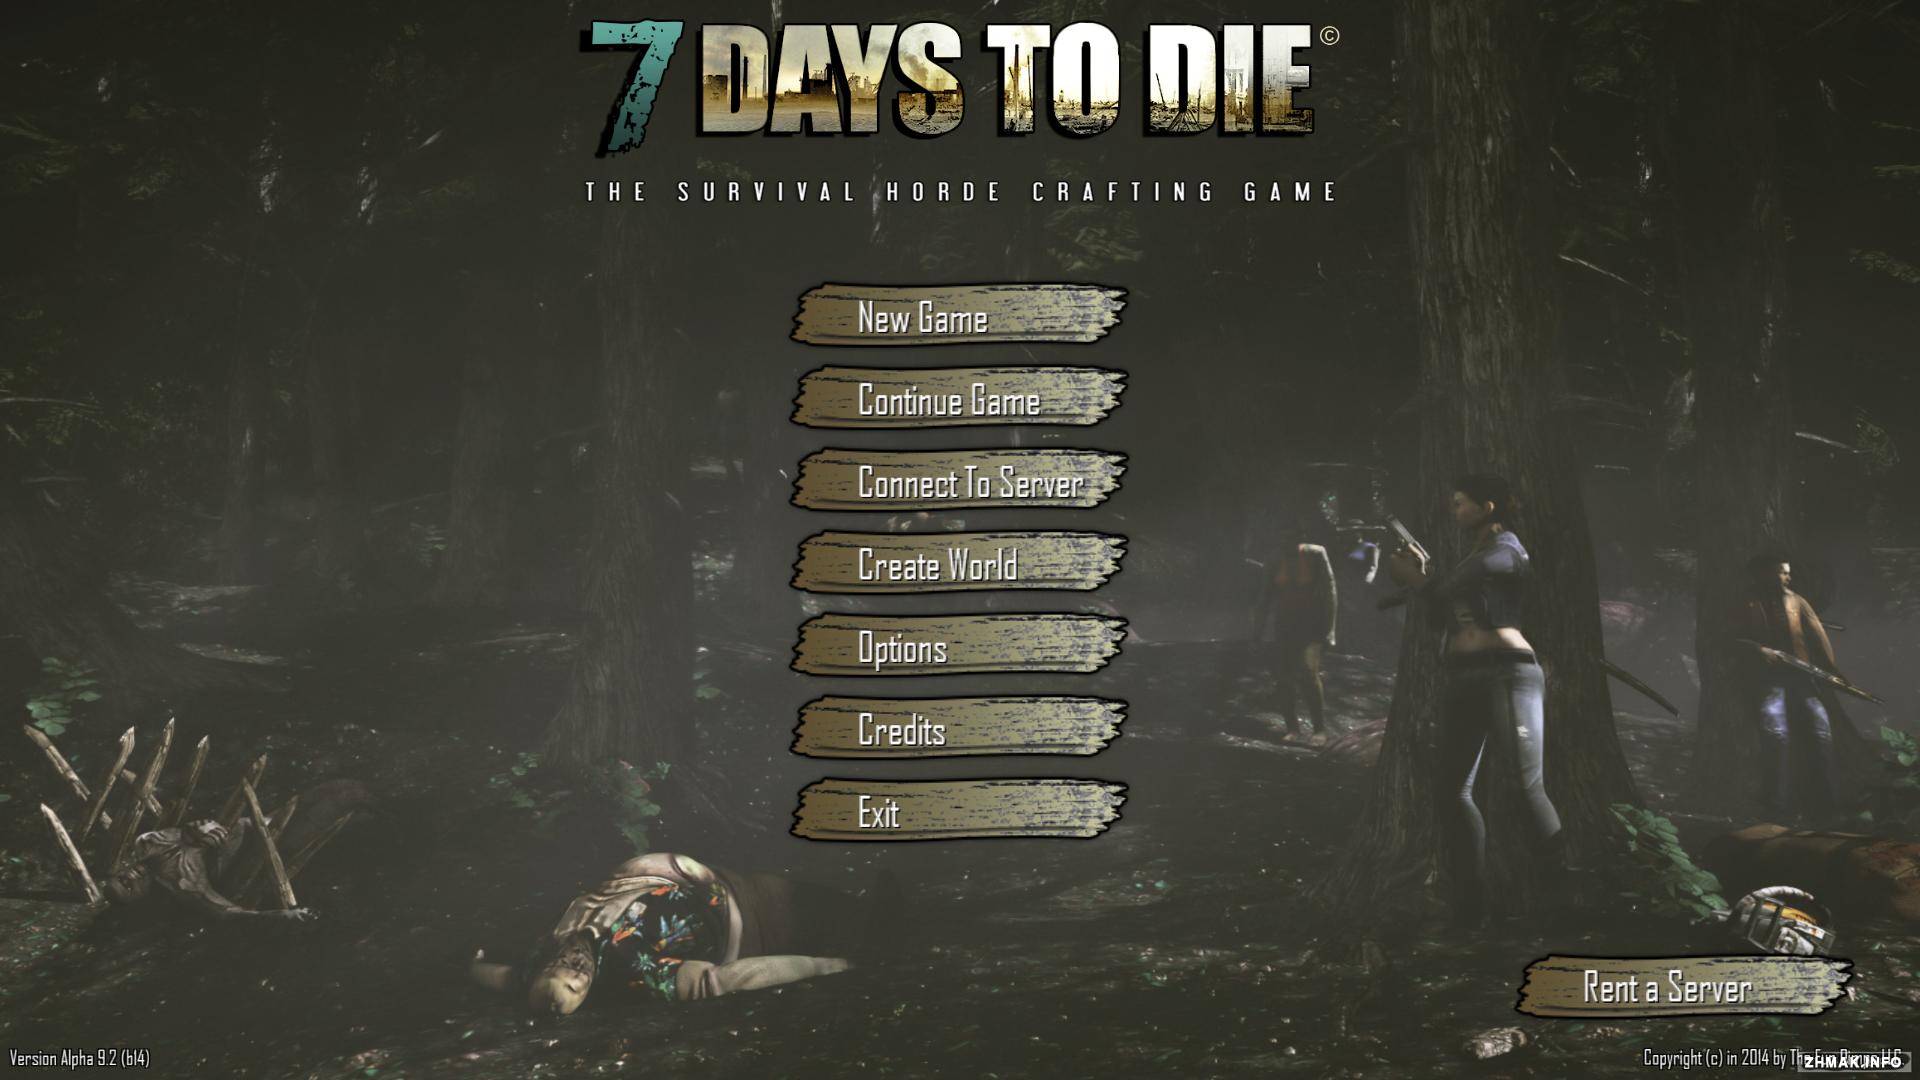 The 7 days to die steam фото 75